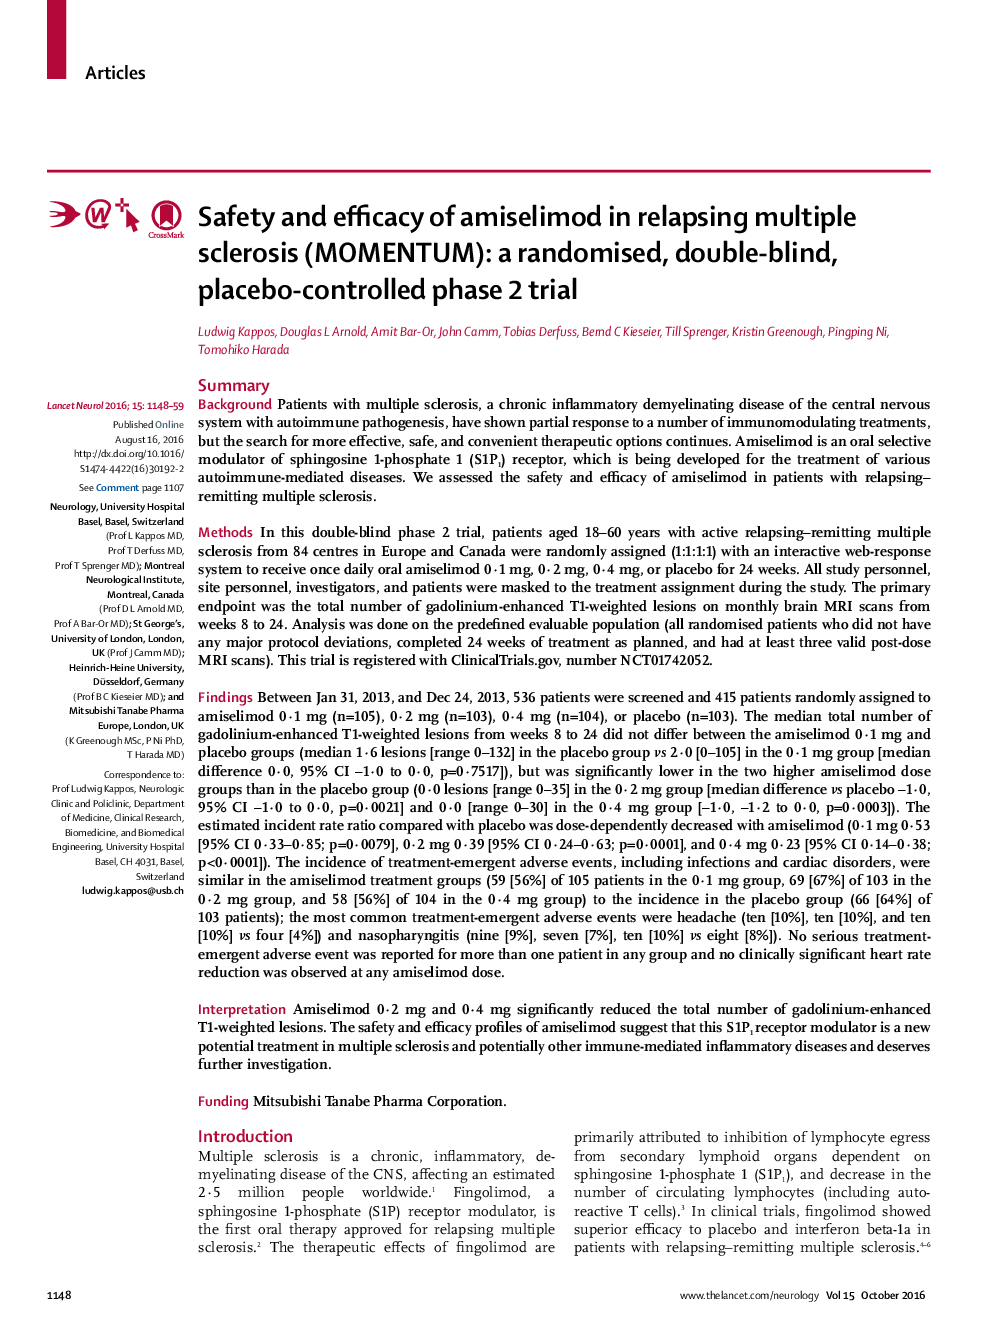 Safety and efficacy of amiselimod in relapsing multiple sclerosis (MOMENTUM): a randomised, double-blind, placebo-controlled phase 2 trial